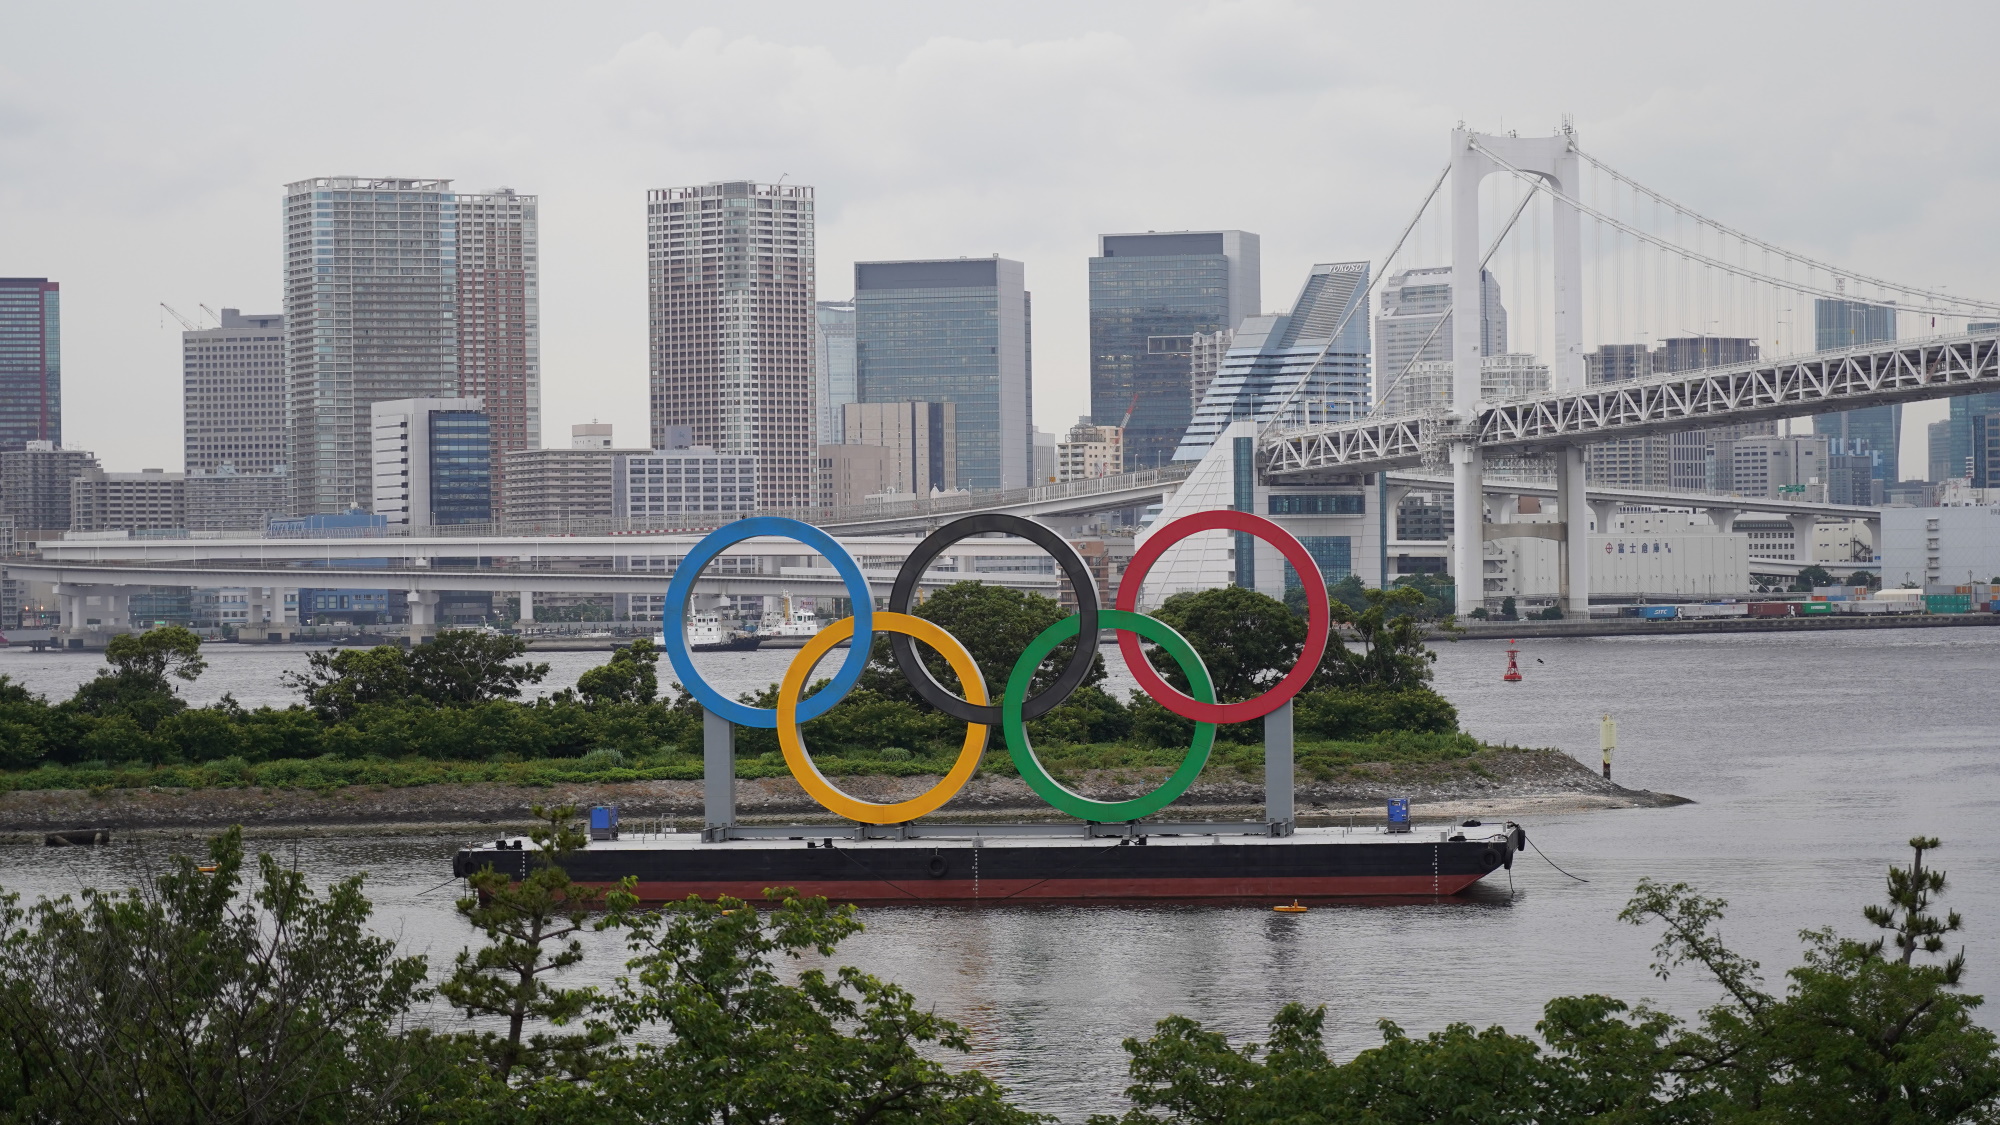 The Olympic Rings are seen displayed by the Odaiba Marine Park